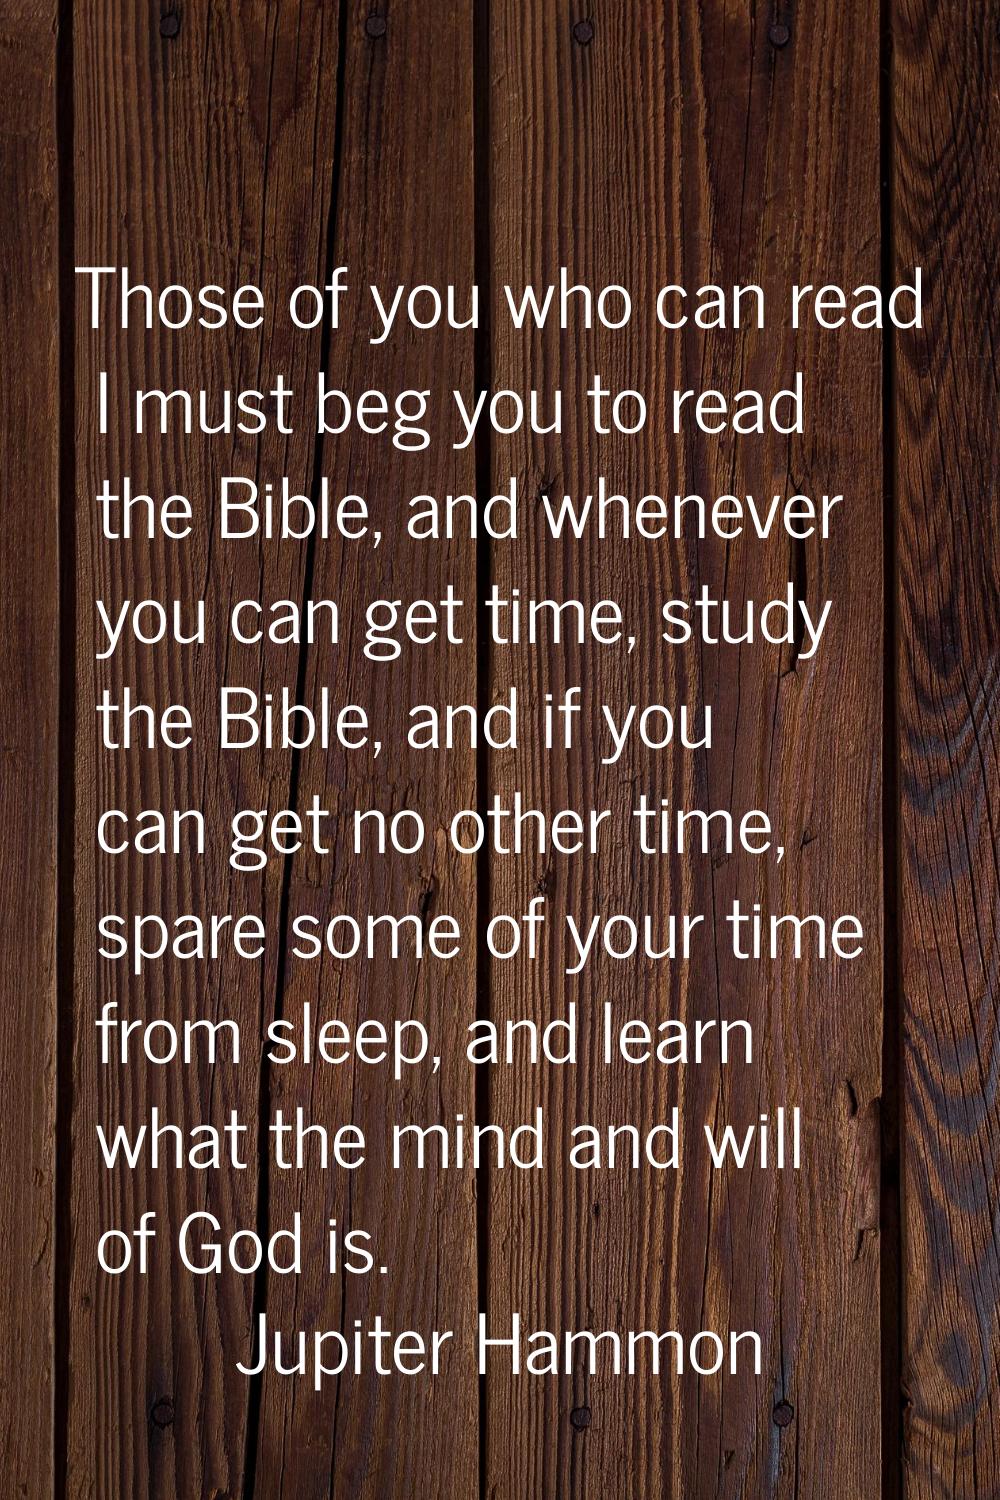 Those of you who can read I must beg you to read the Bible, and whenever you can get time, study th